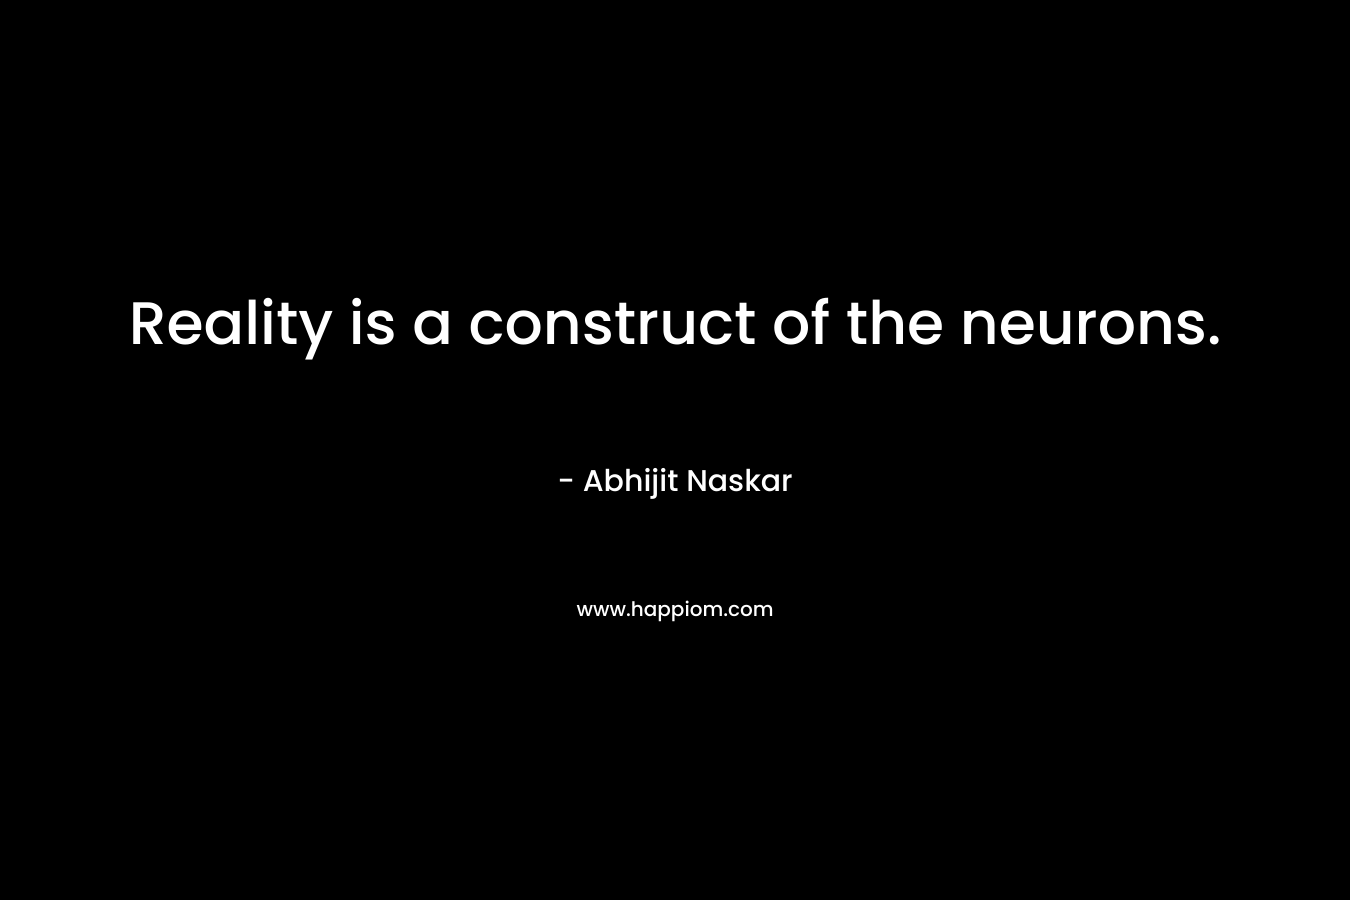 Reality is a construct of the neurons. – Abhijit Naskar